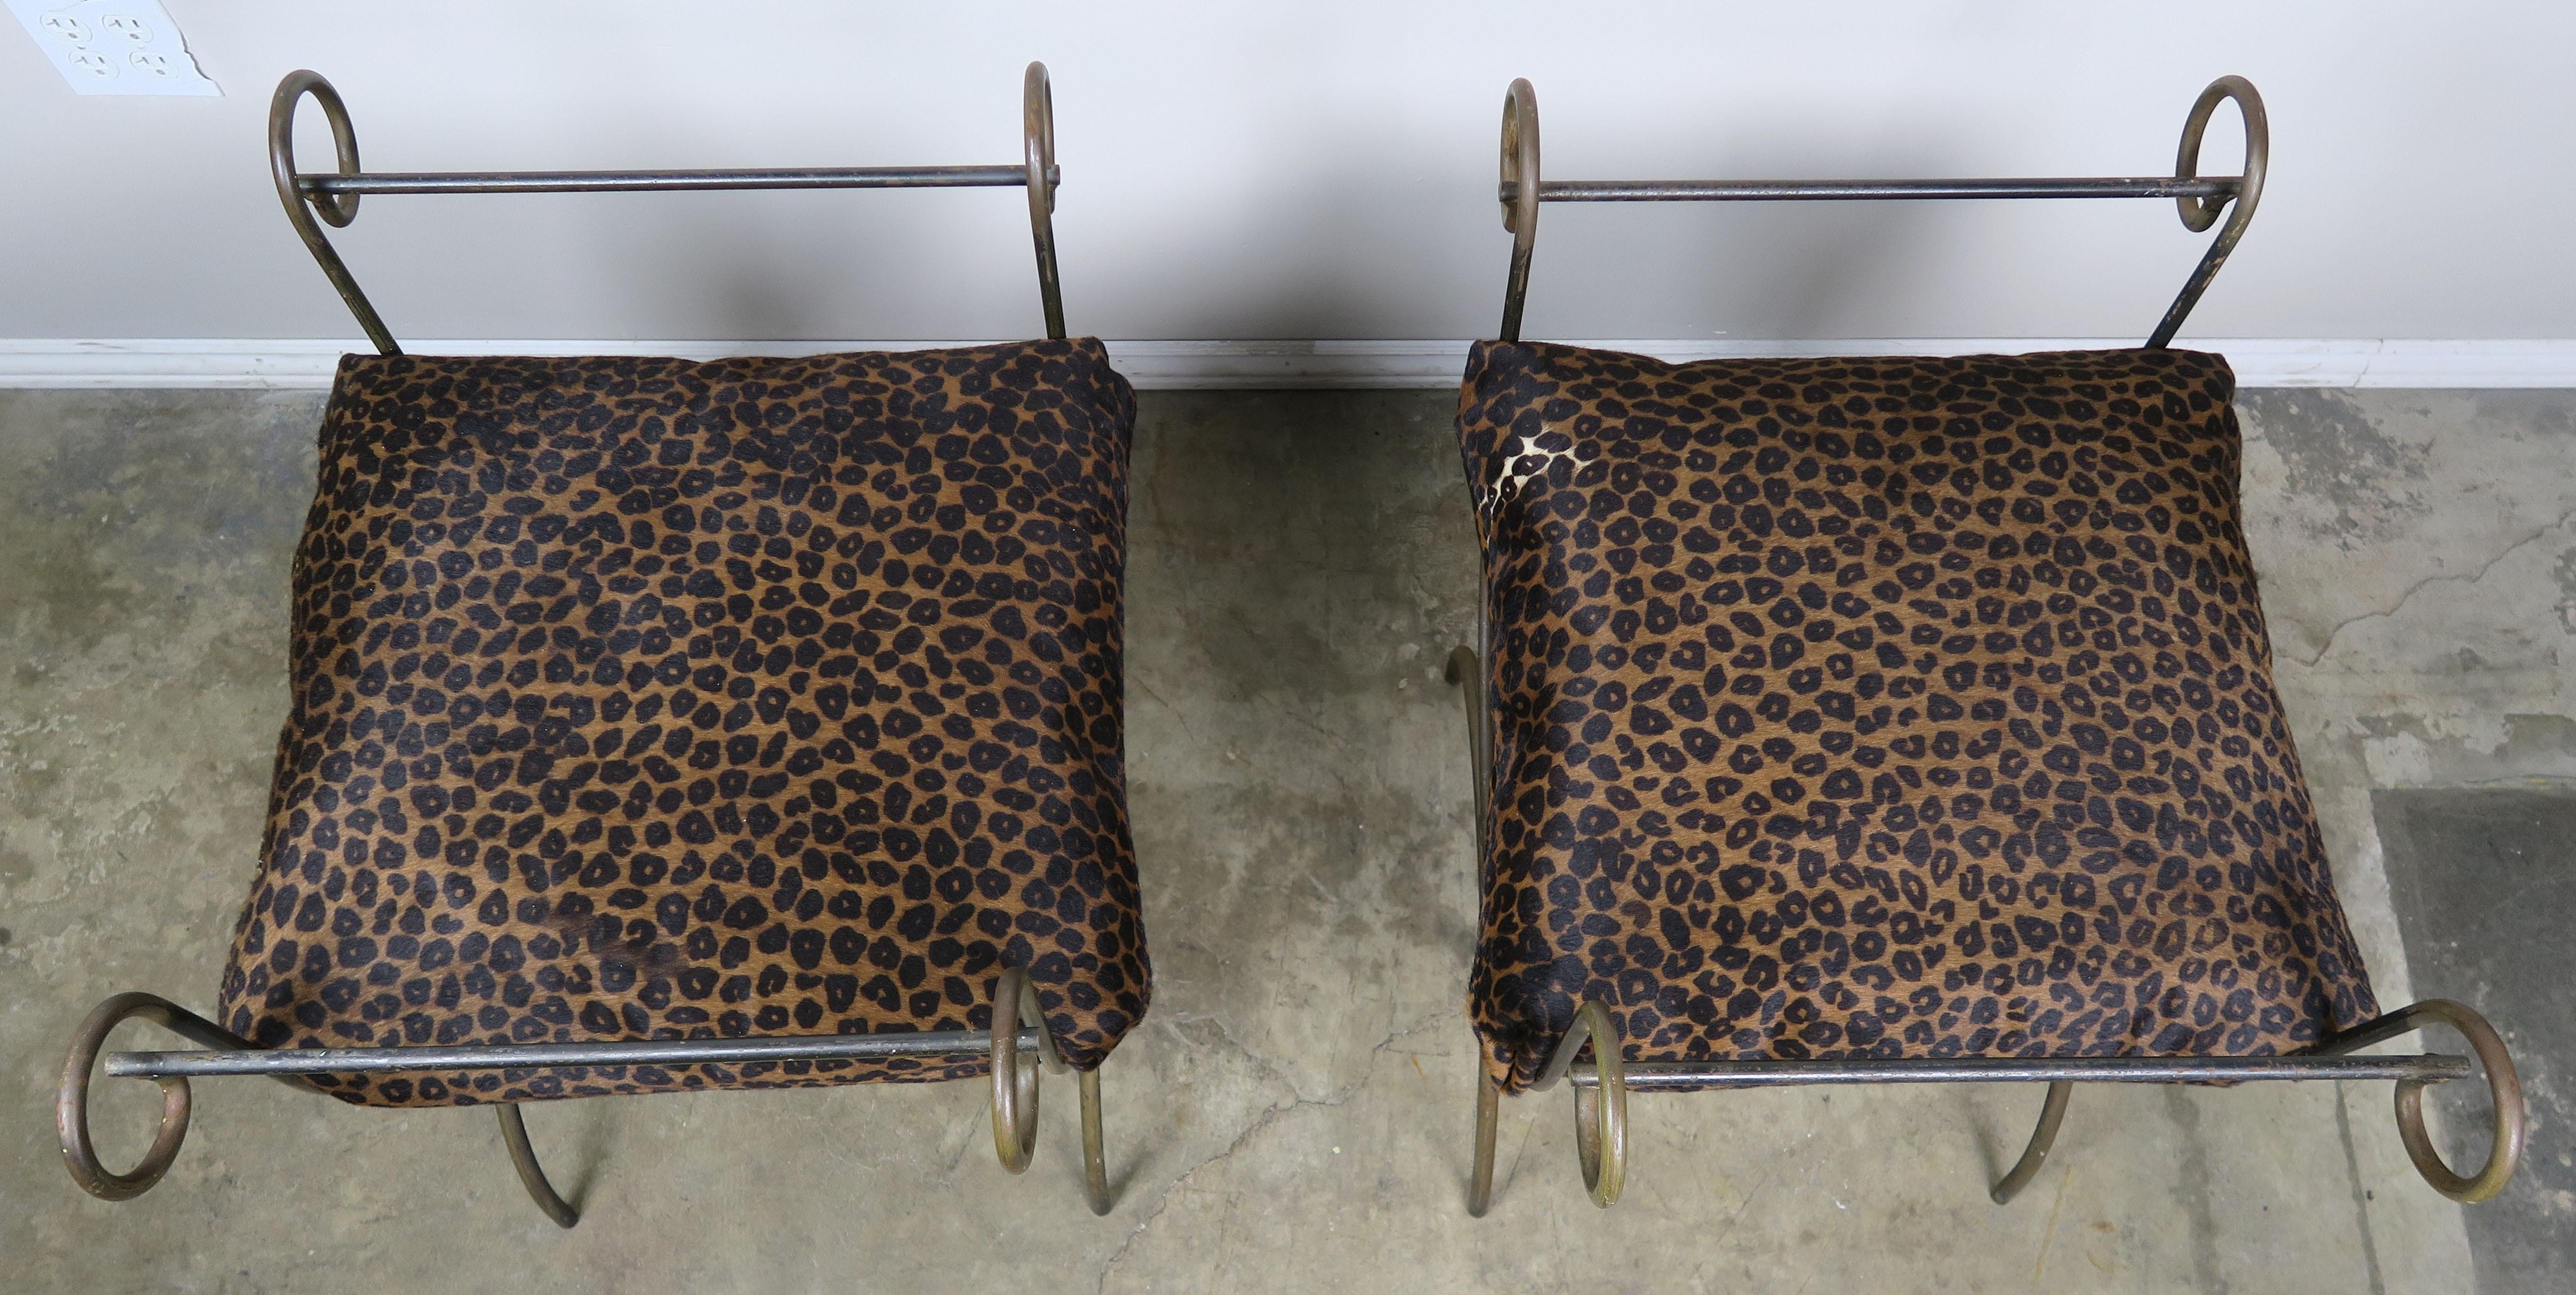 Cowhide Pair of Wrought Iron Benches with Leopard Style Cushions